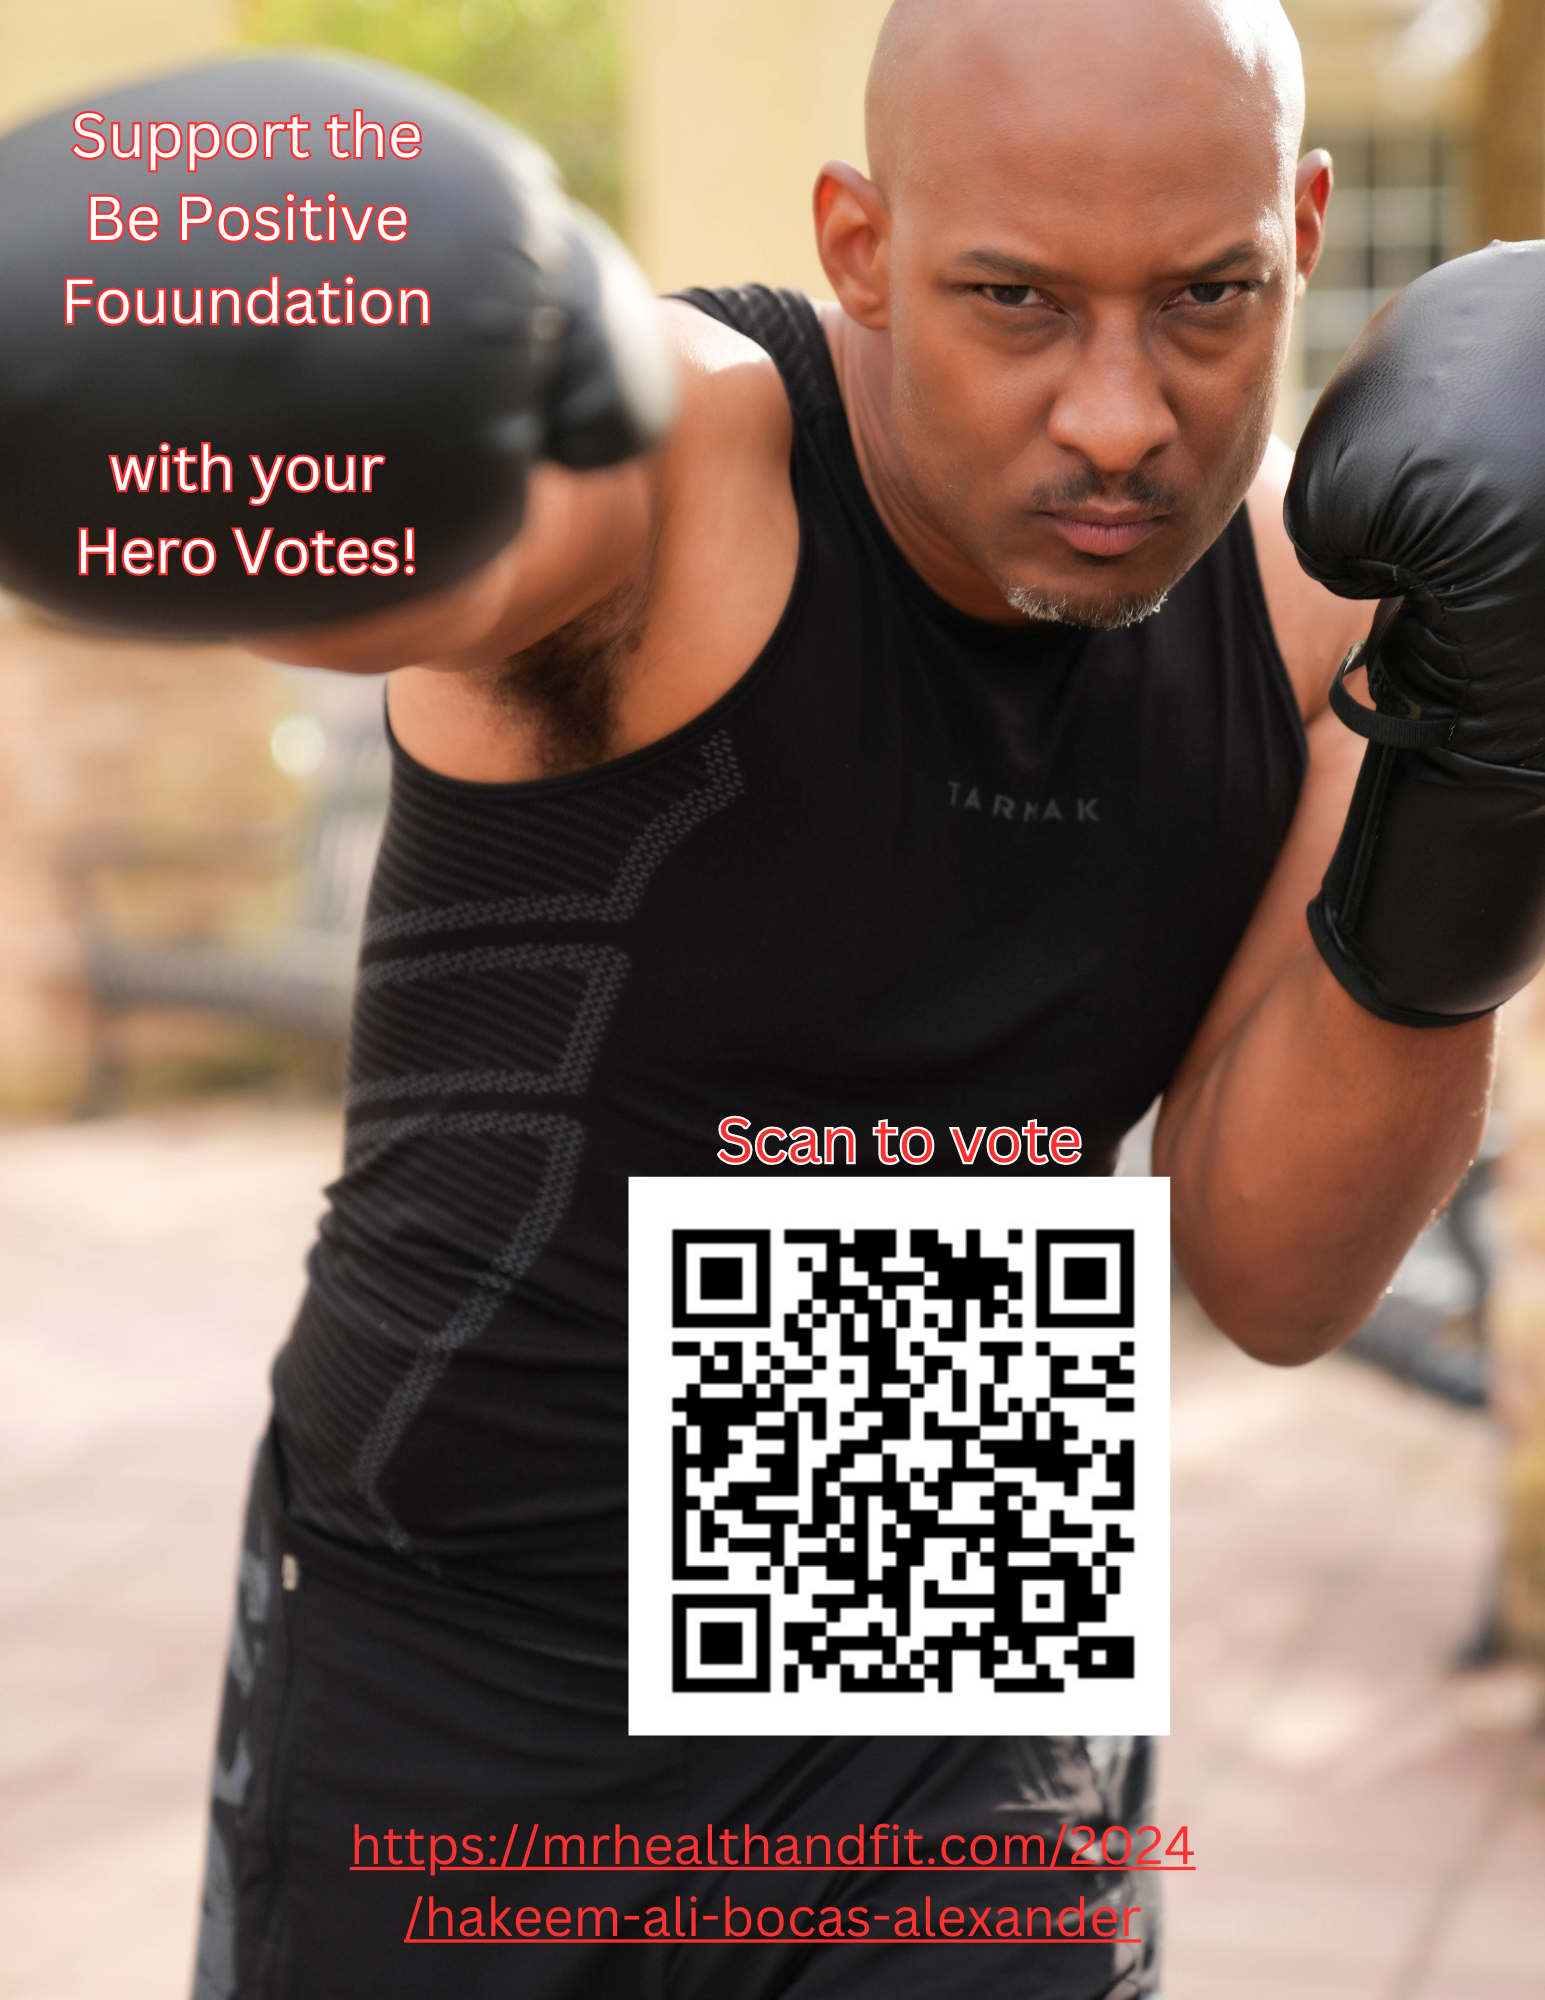 Your Hero Votes Support the Be Positive Foundation!